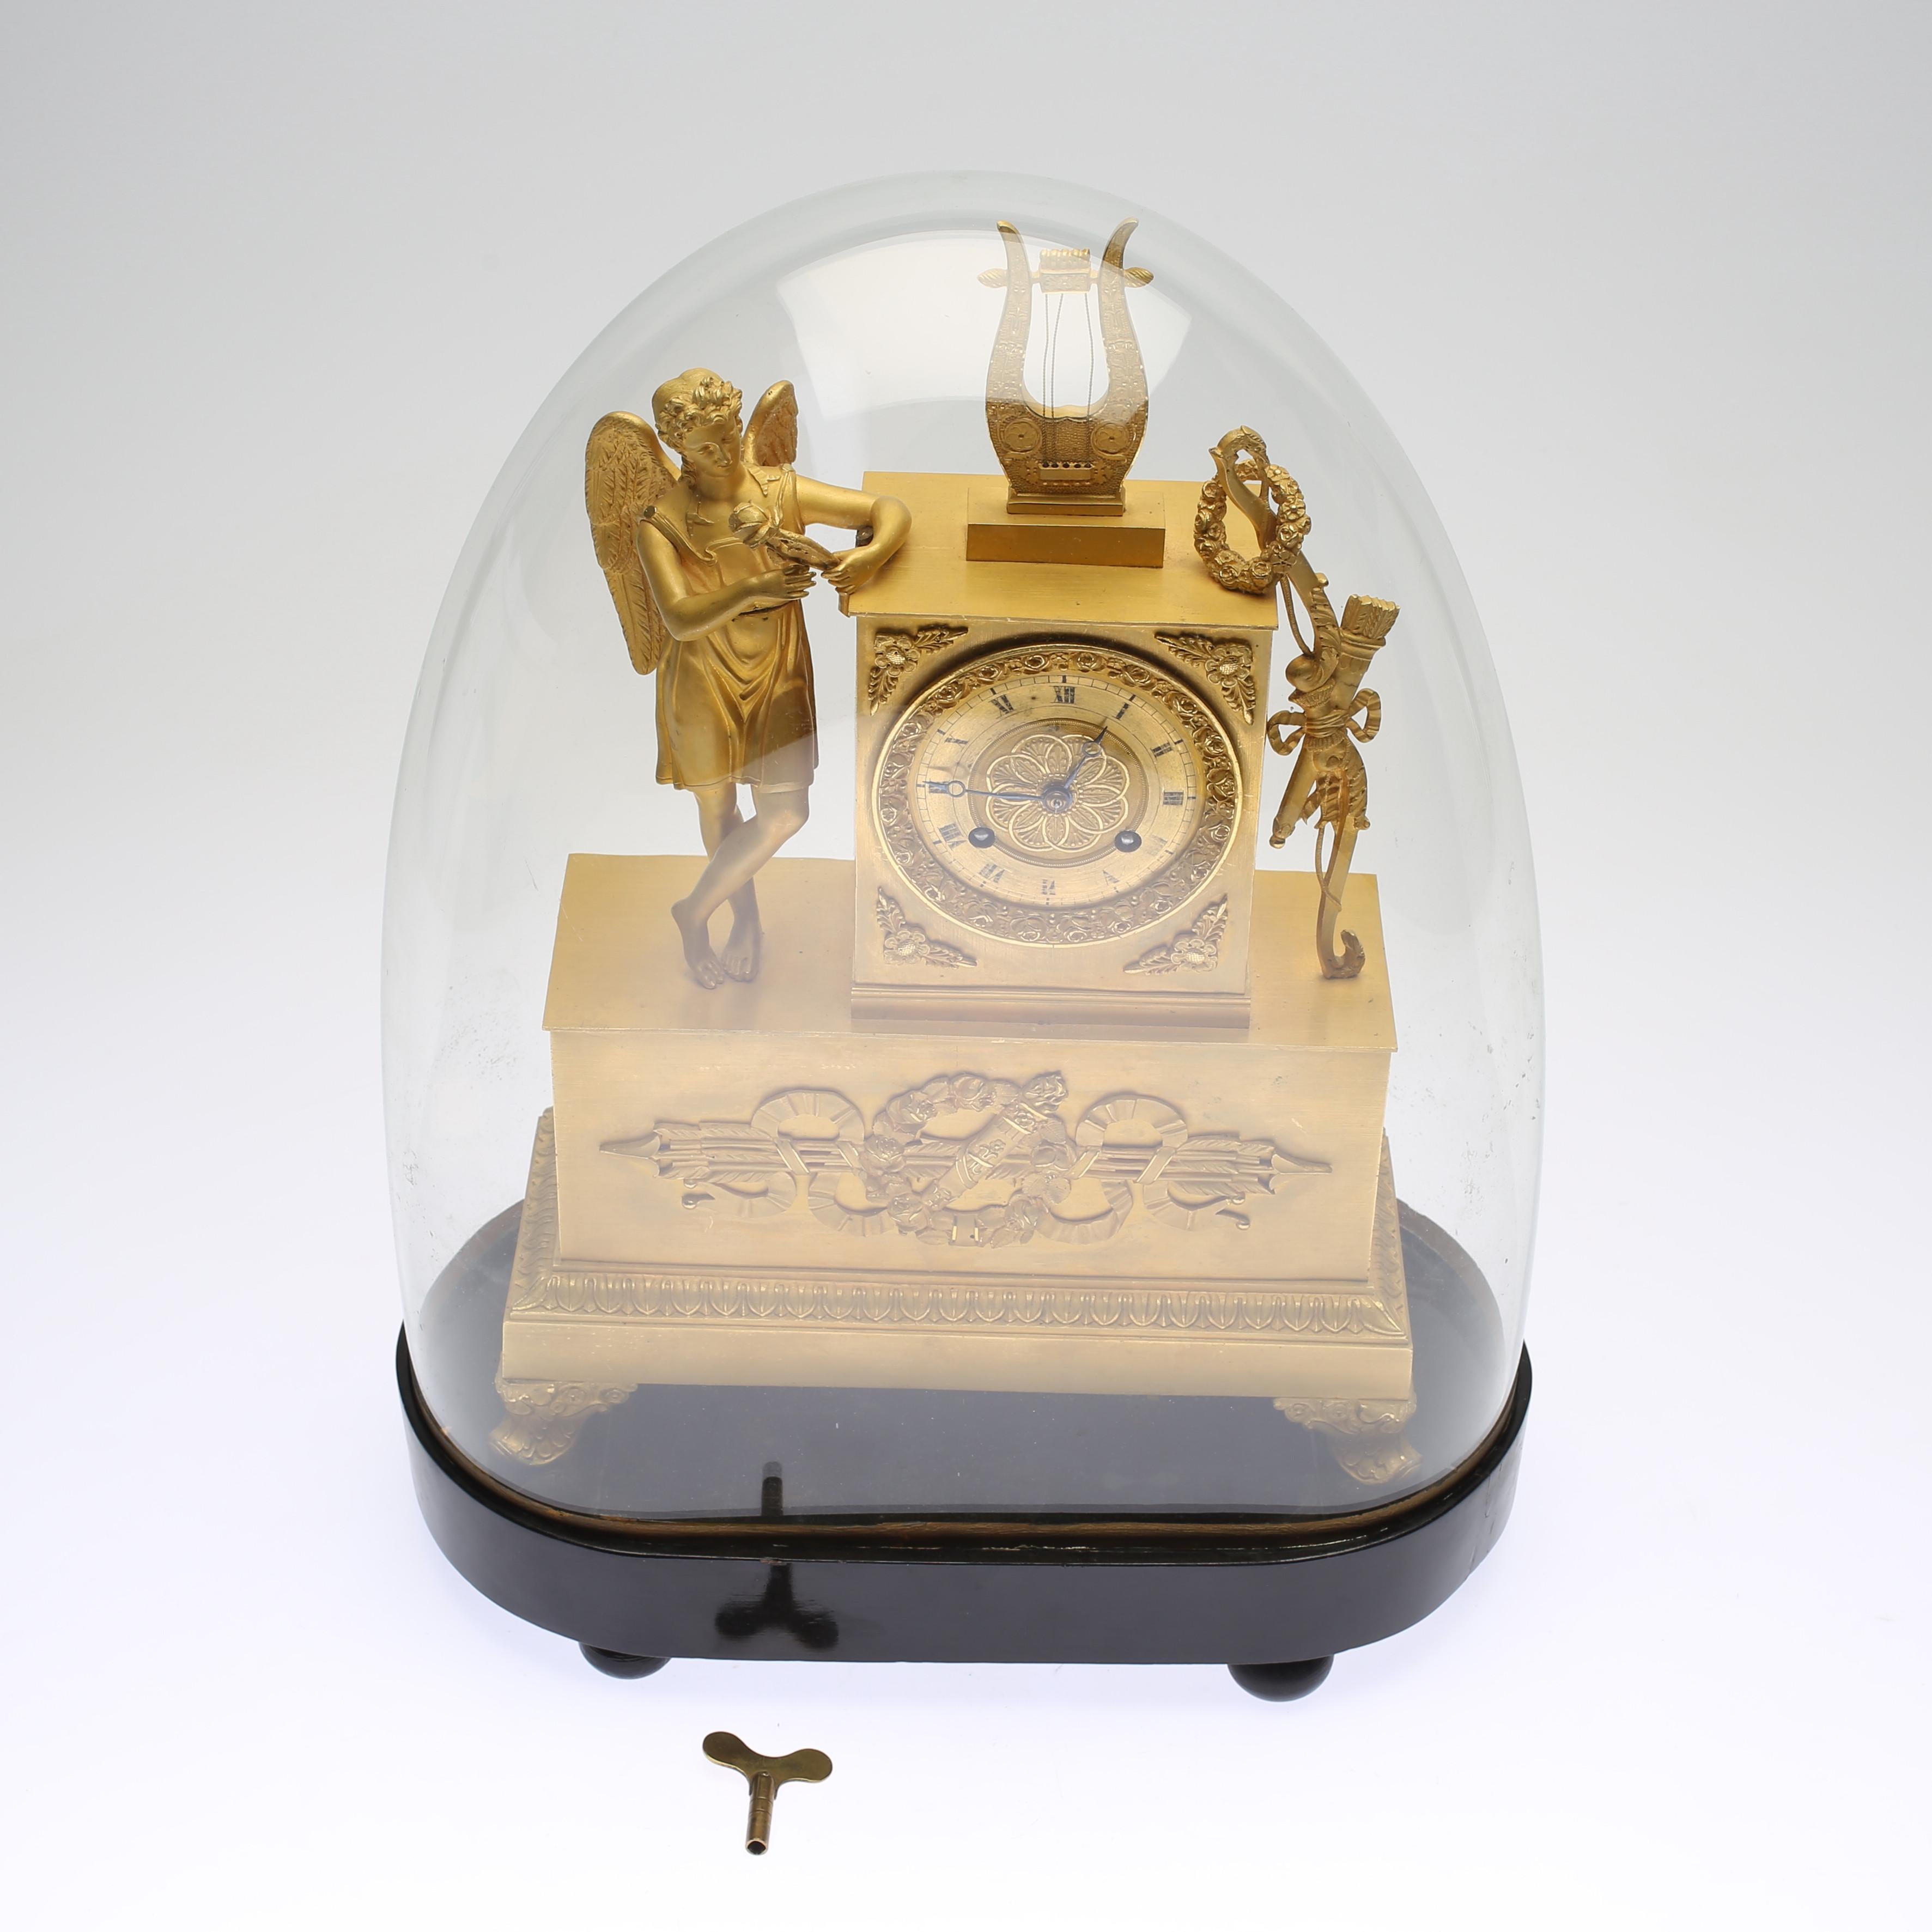 Early 19th century gilt brass mantle clock with the glass hood. Decor of foliage, arrows, and bow. Crowned by an angel with lyre. The glas dome has protected it beautifully and it is in beautiful condition for its age.